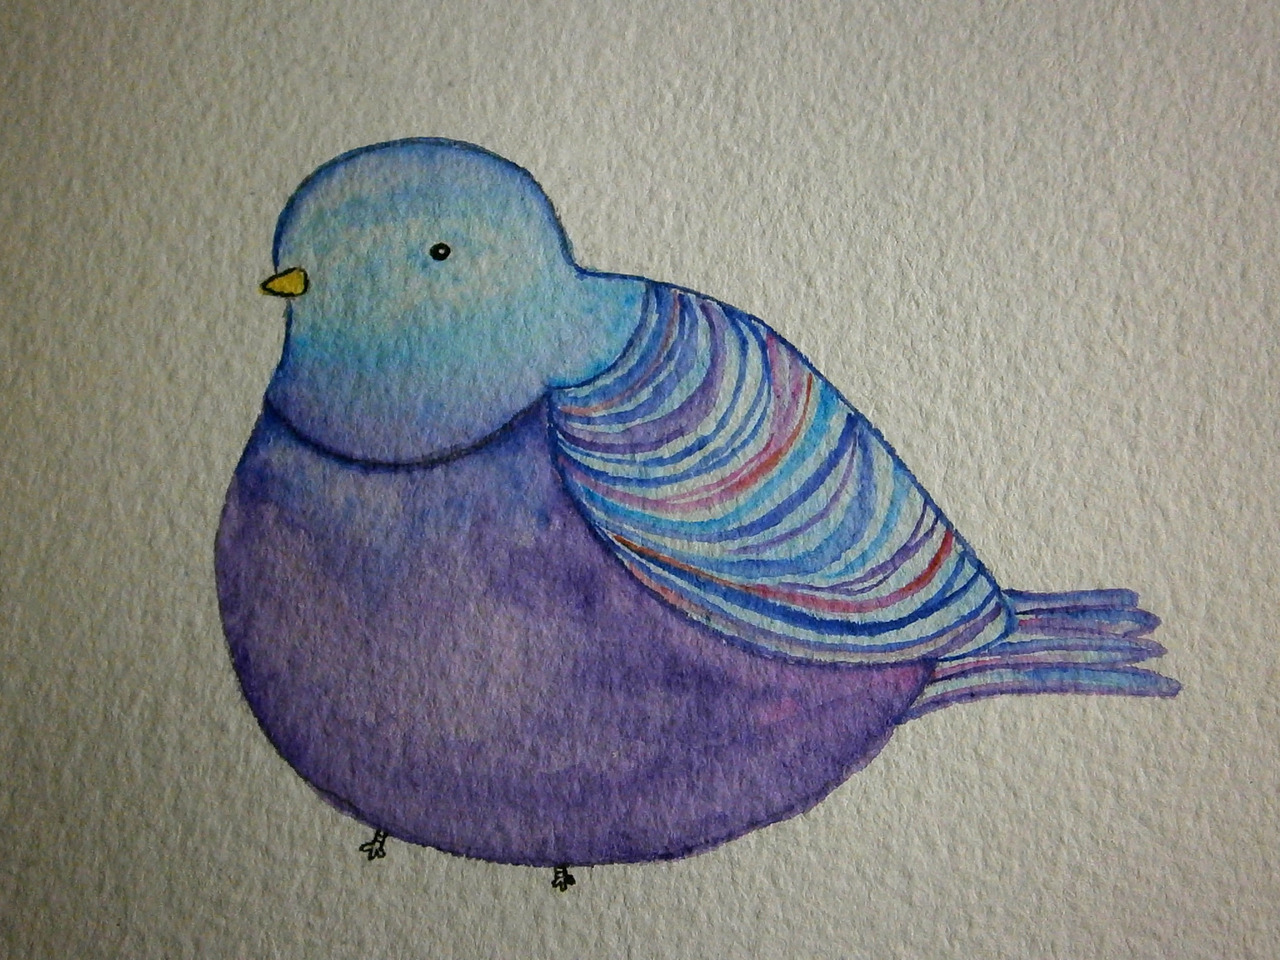 Pigeon inspired by the work of Kate Wilson (littledoodles.net) a birthday card for my friend :) Watercolour. come visit my tumblr for more: joyclan.tumblr.com :)